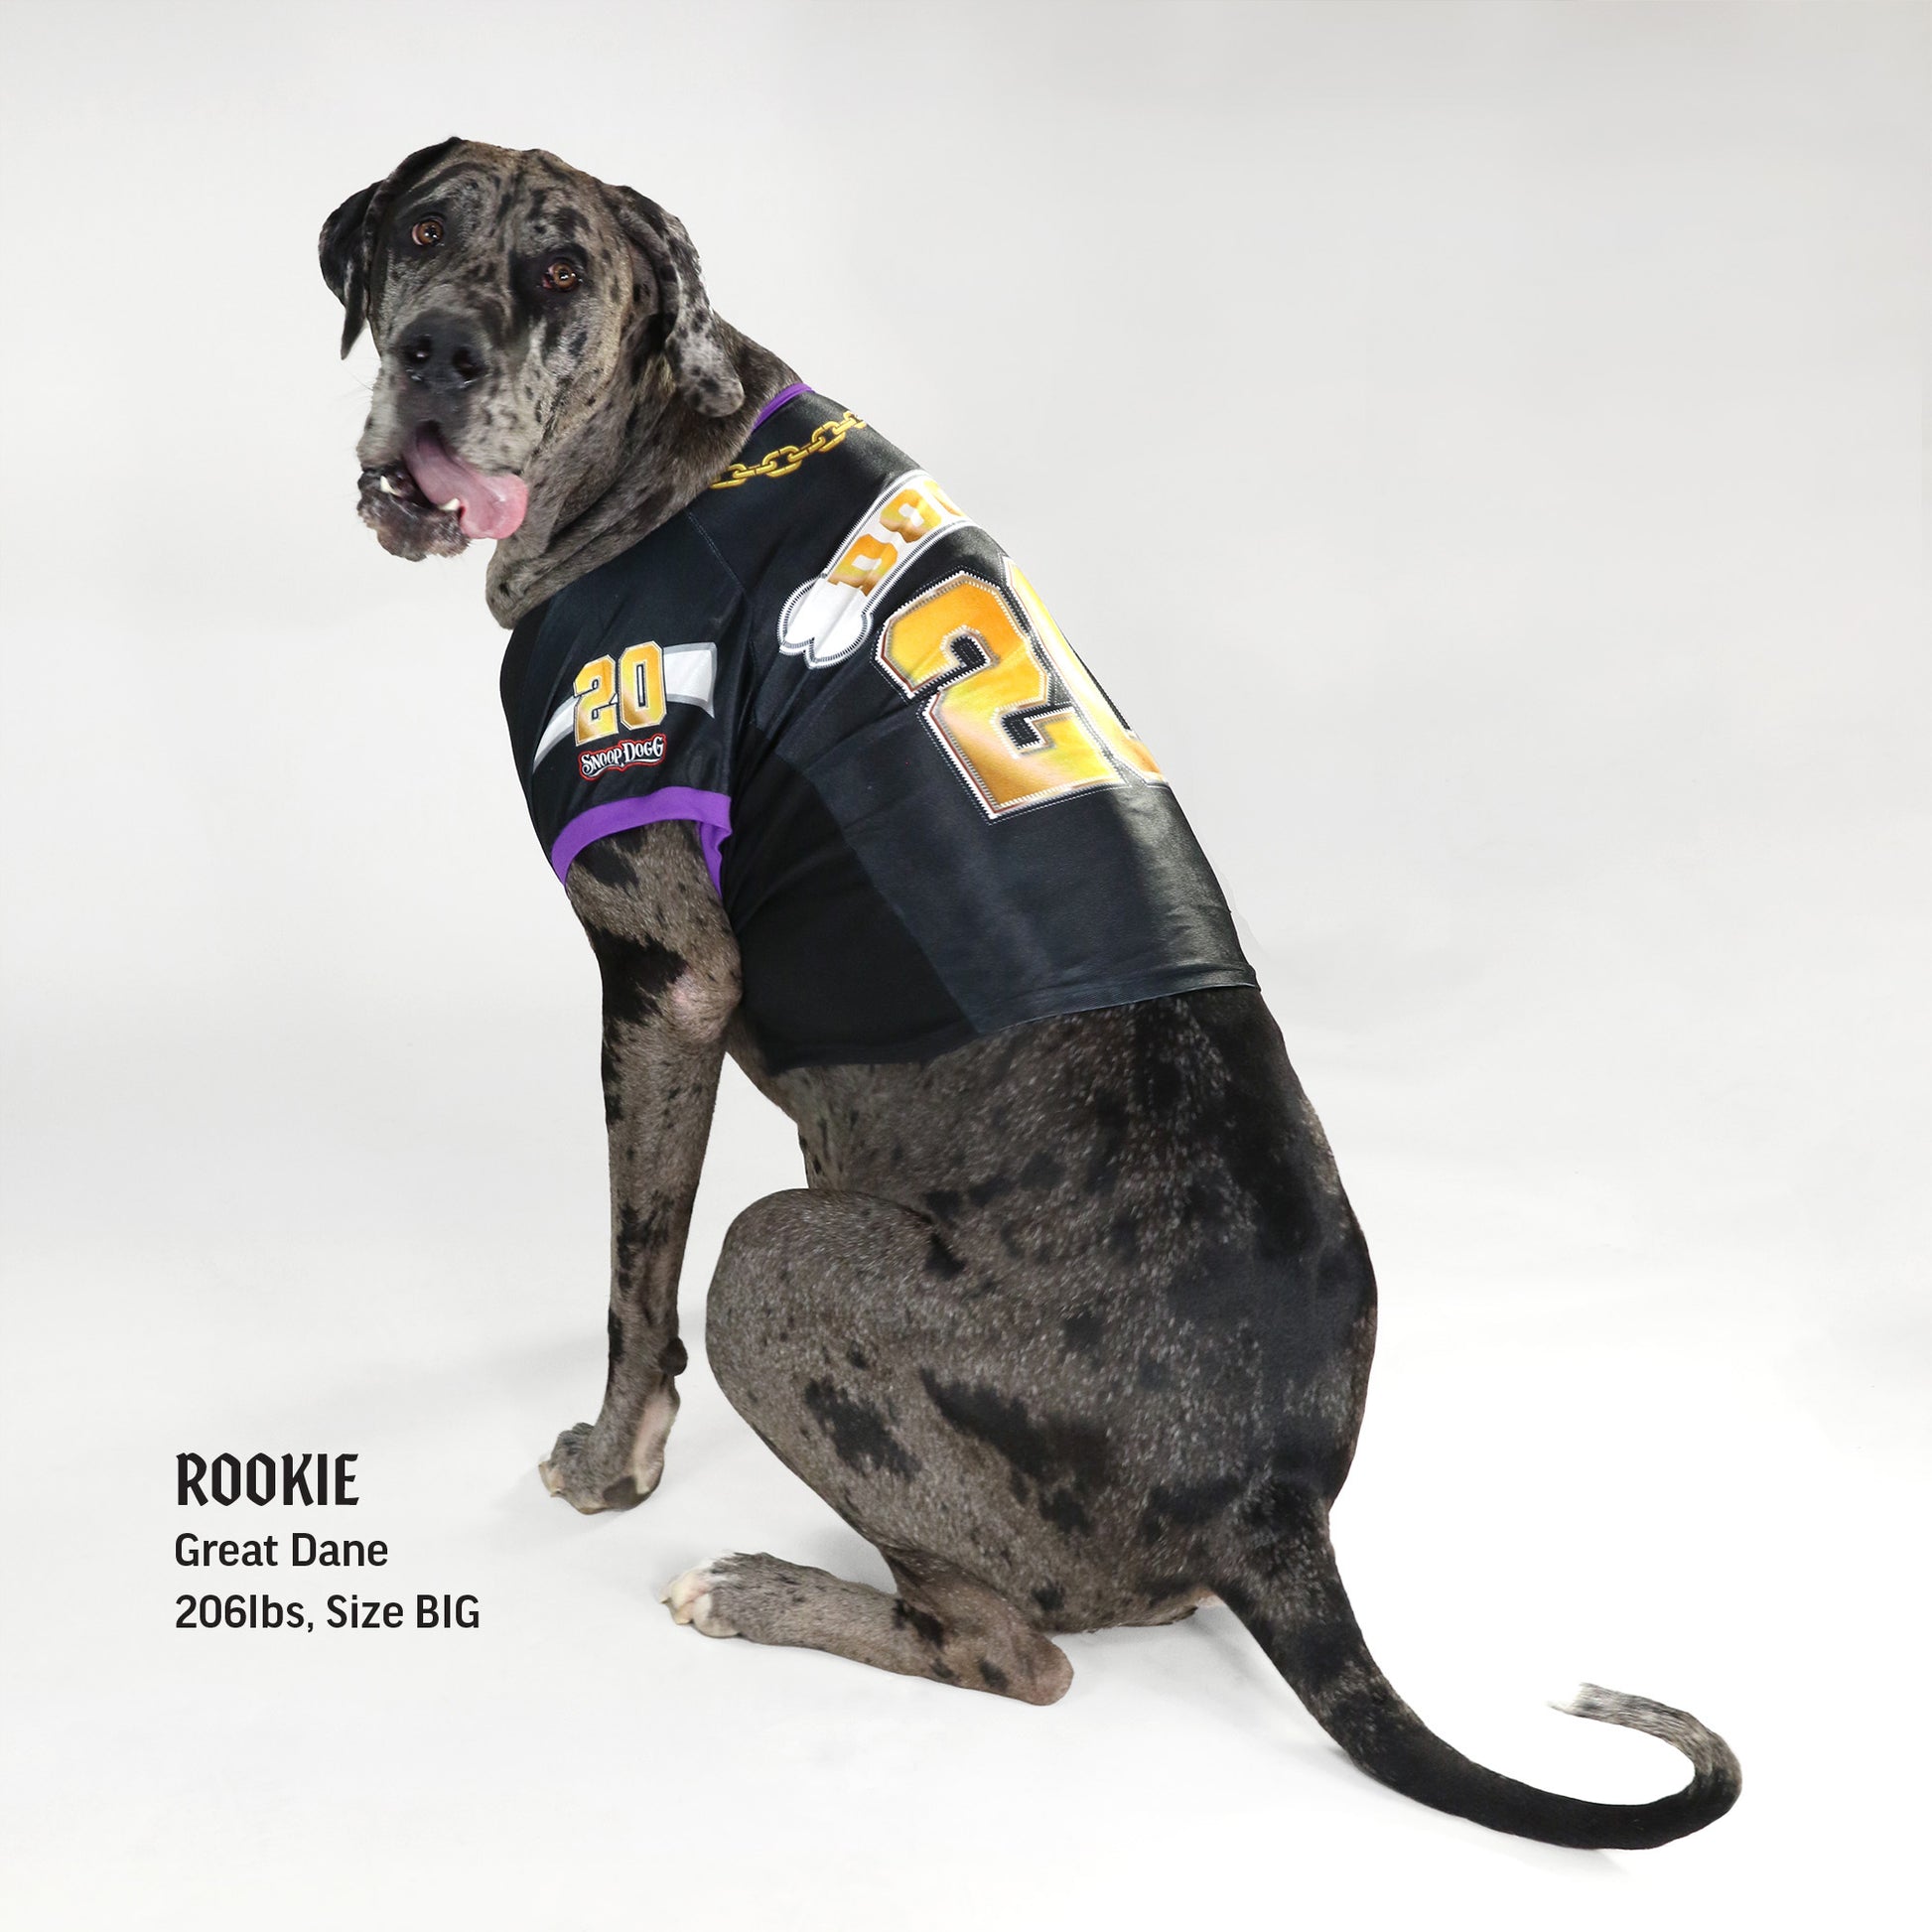 Rookie the Great Dane wearing the Off The Chain Deluxe Pet Jersey in size Big.